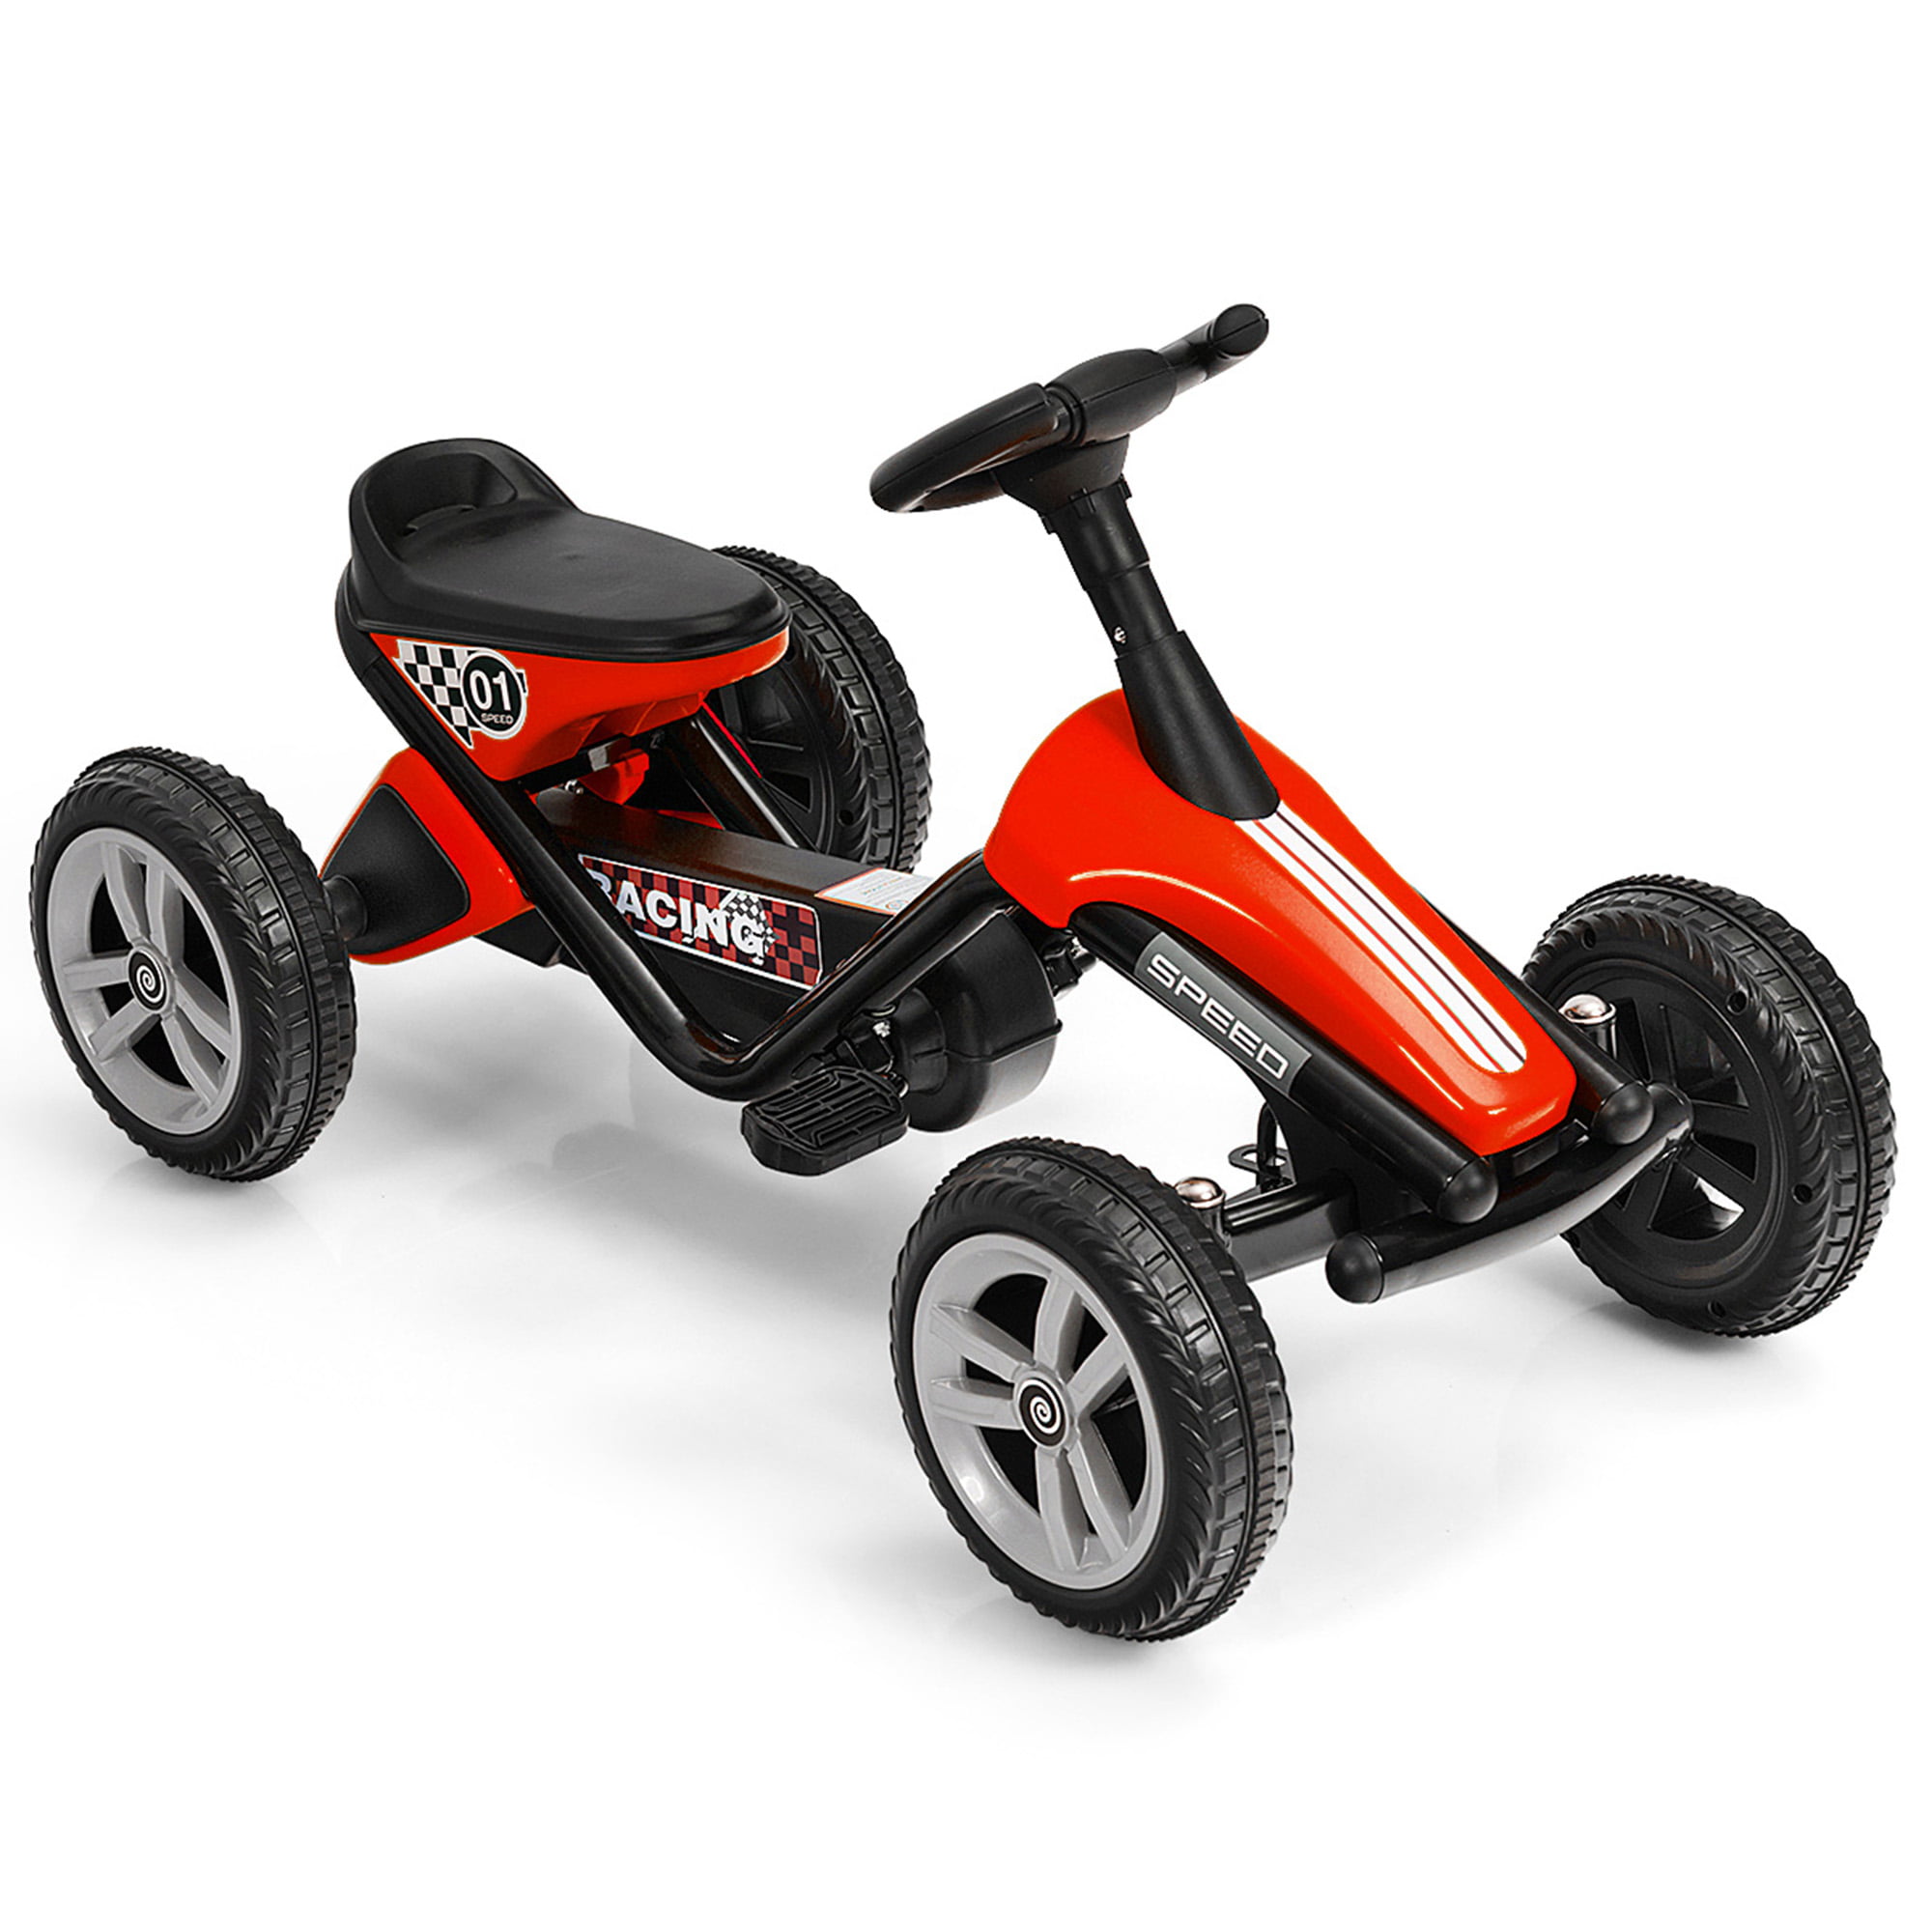 Pedal Car Details about   Pedal Go Kart Ride On Toys For Boys & Girls Aged 3-8 